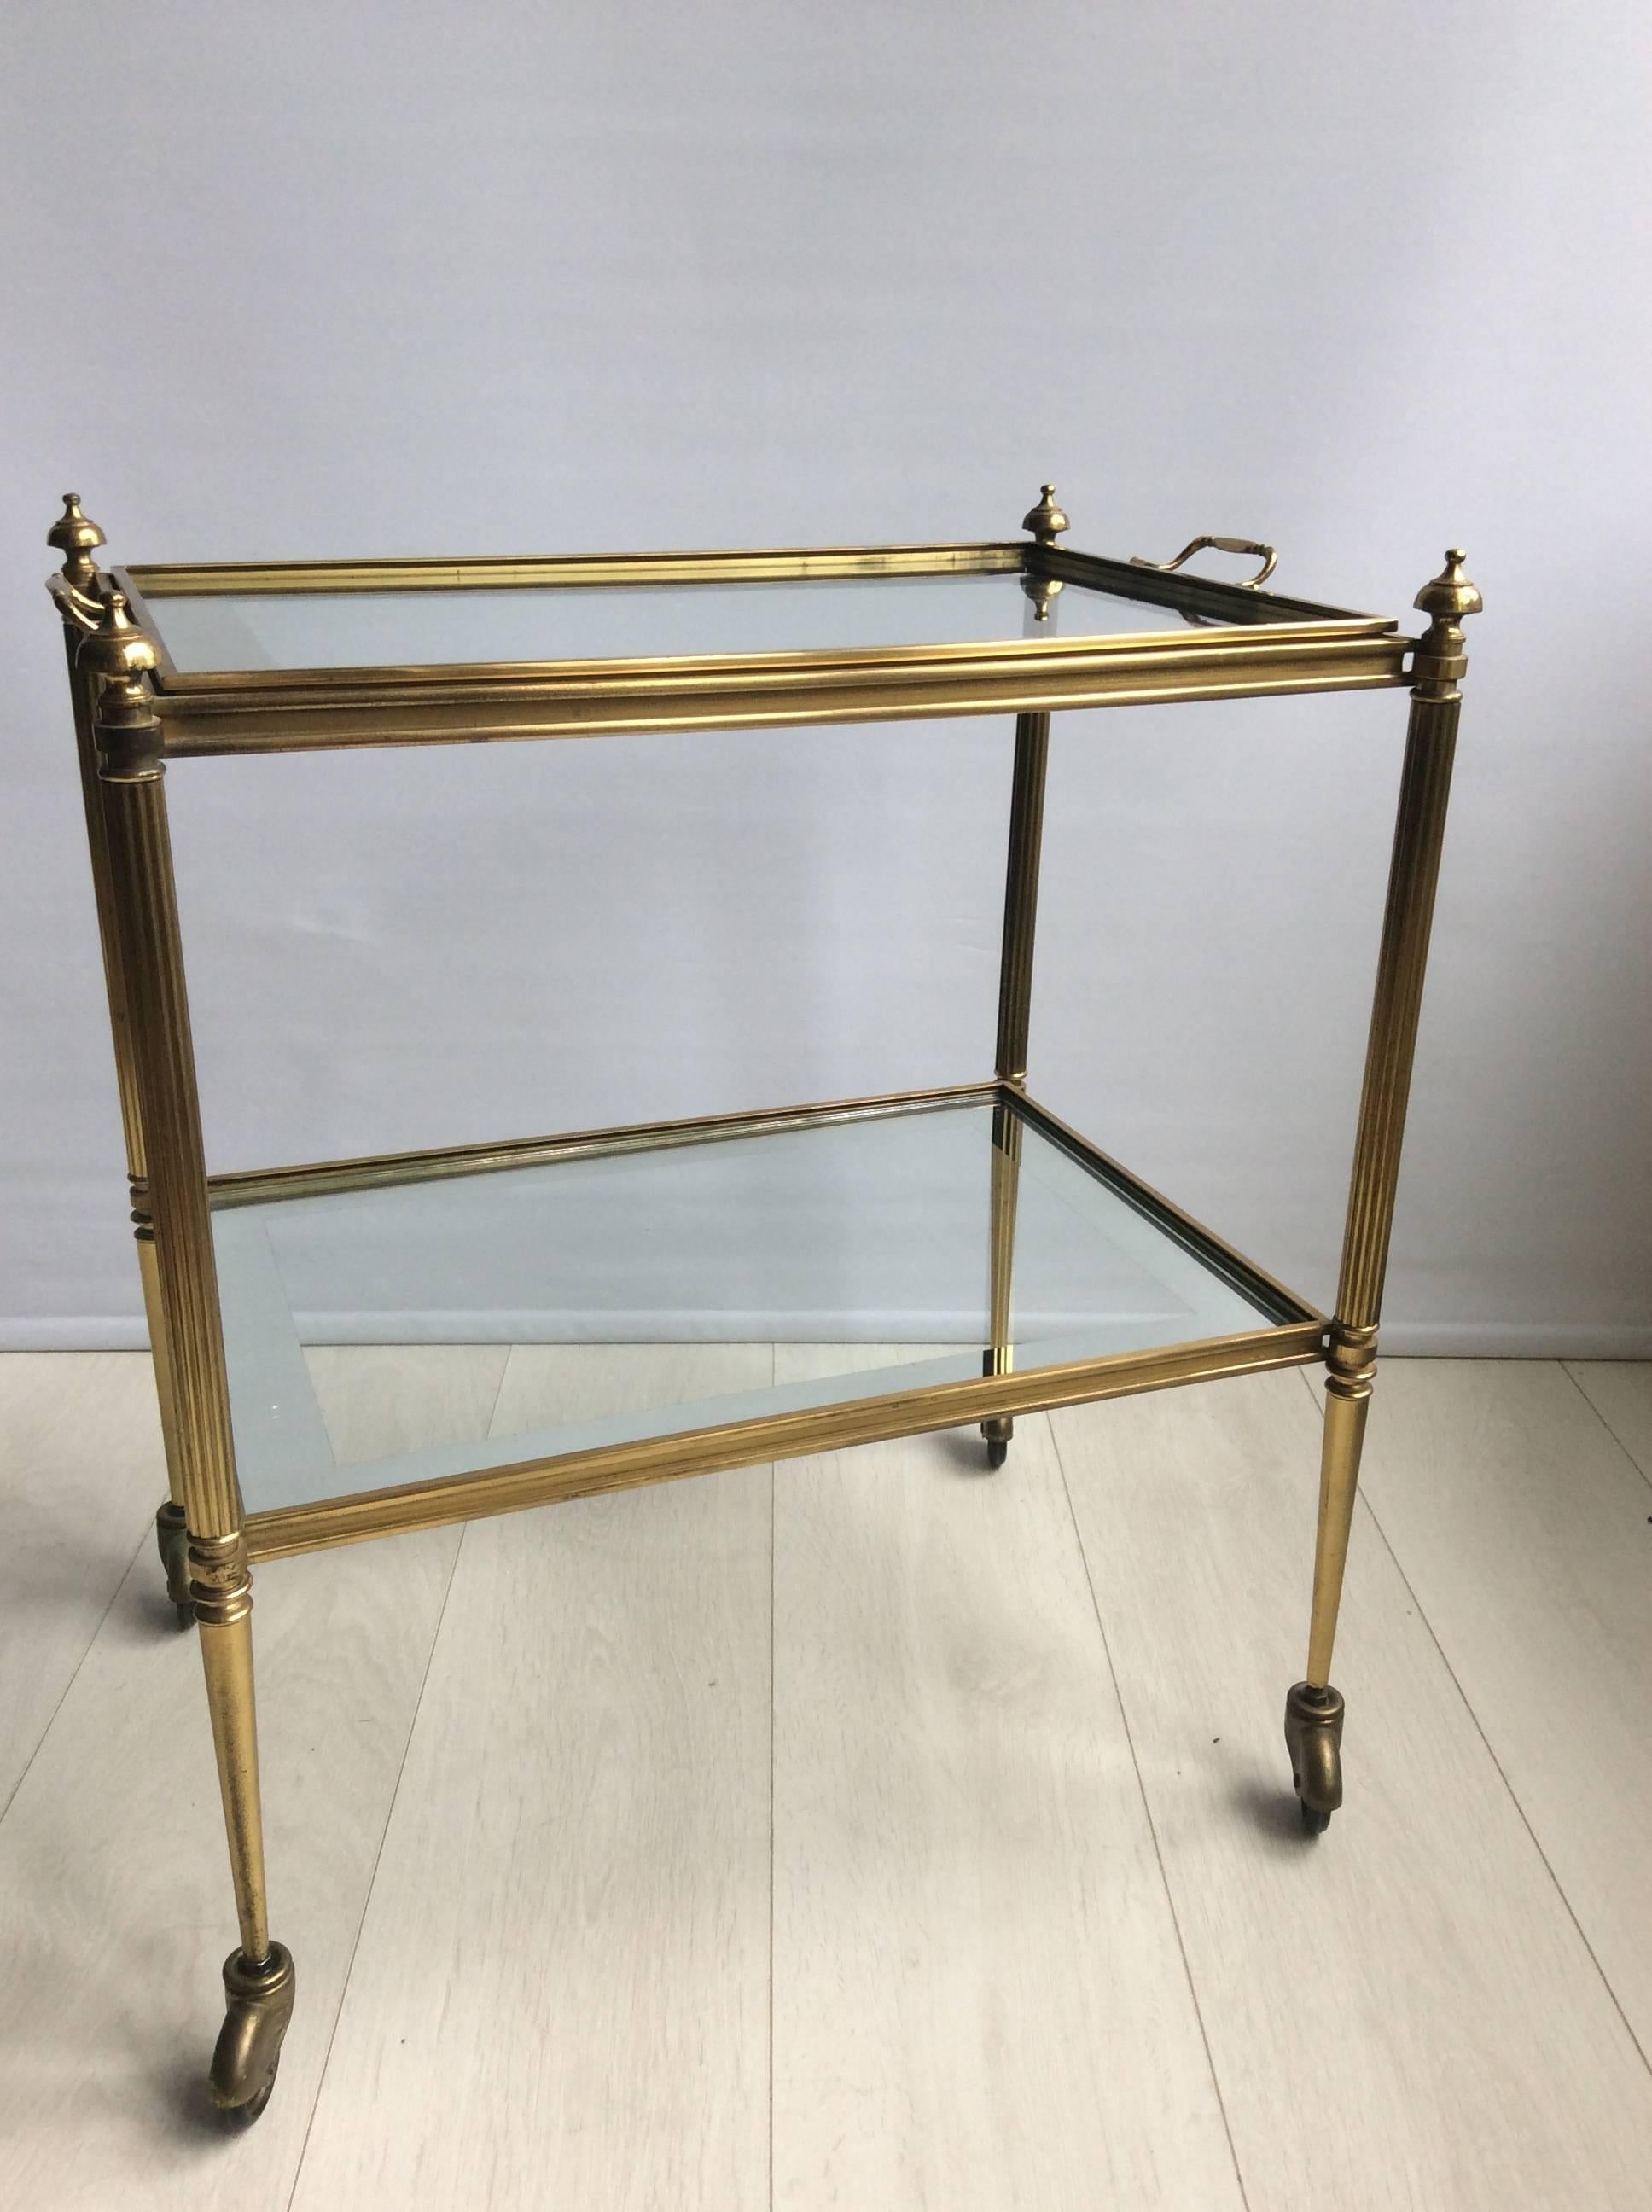 Elegant vintage French drinks trolley with lovely aged patina.

Lift off top tray with mirrored edging to the glass.

Top tray (without handles) measures 49.5cm wide, 34.5cm deep and stands 60cm tall to glass.
Overall dimensions: 56cm wide,